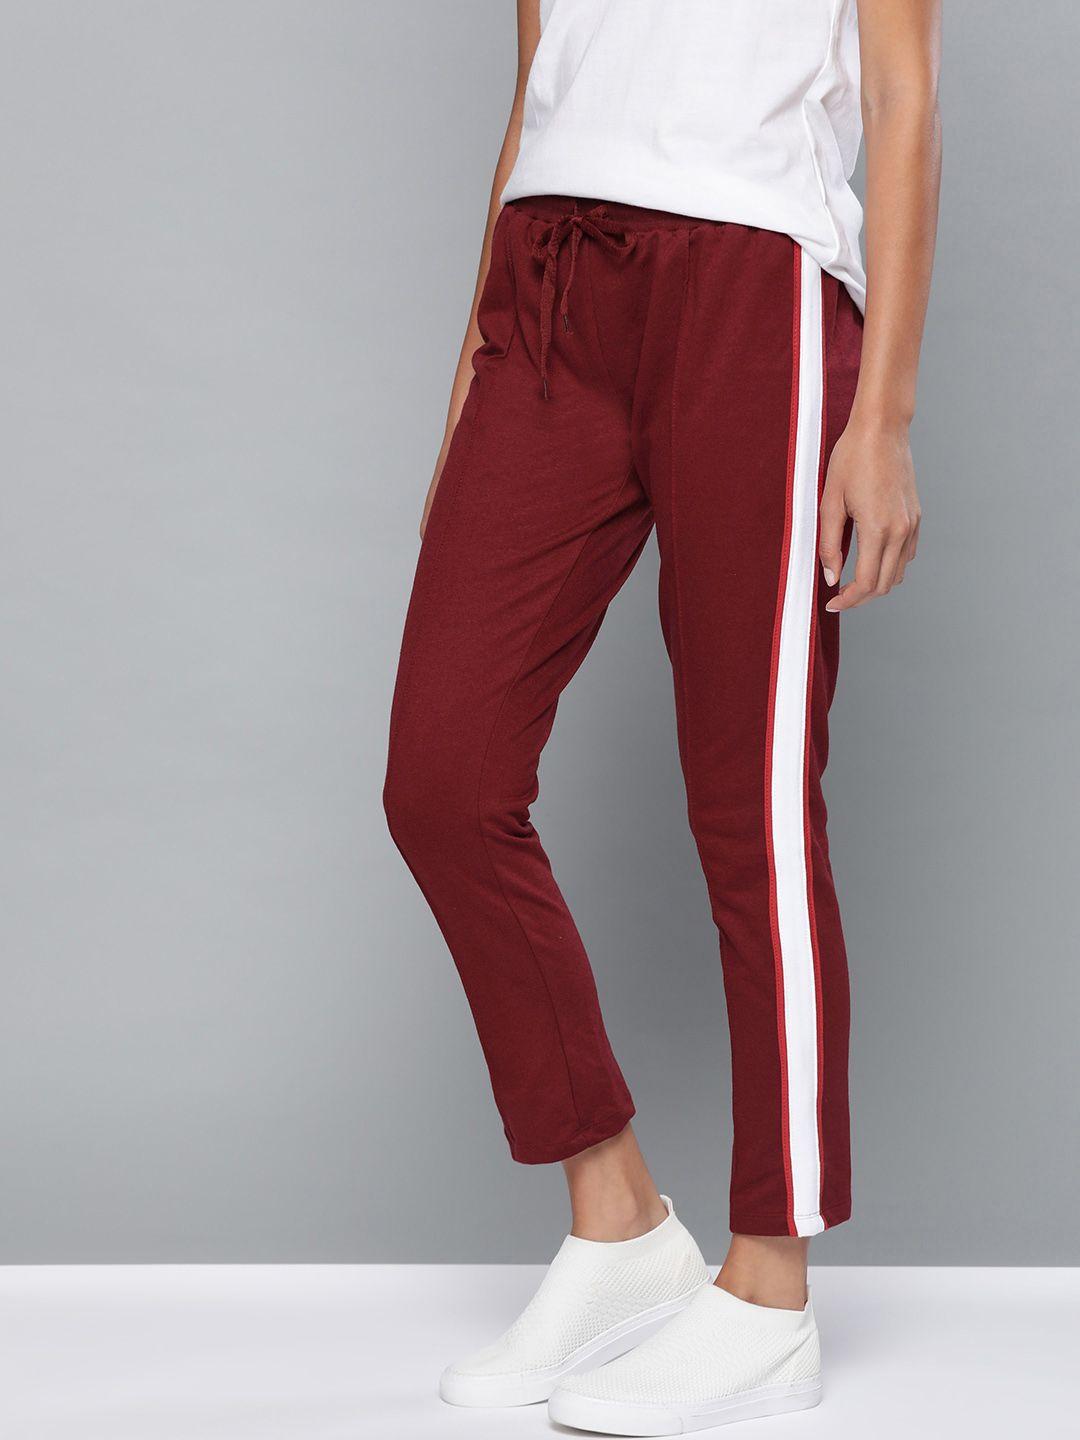 mast & harbour women maroon & white solid track pants with side striped detail